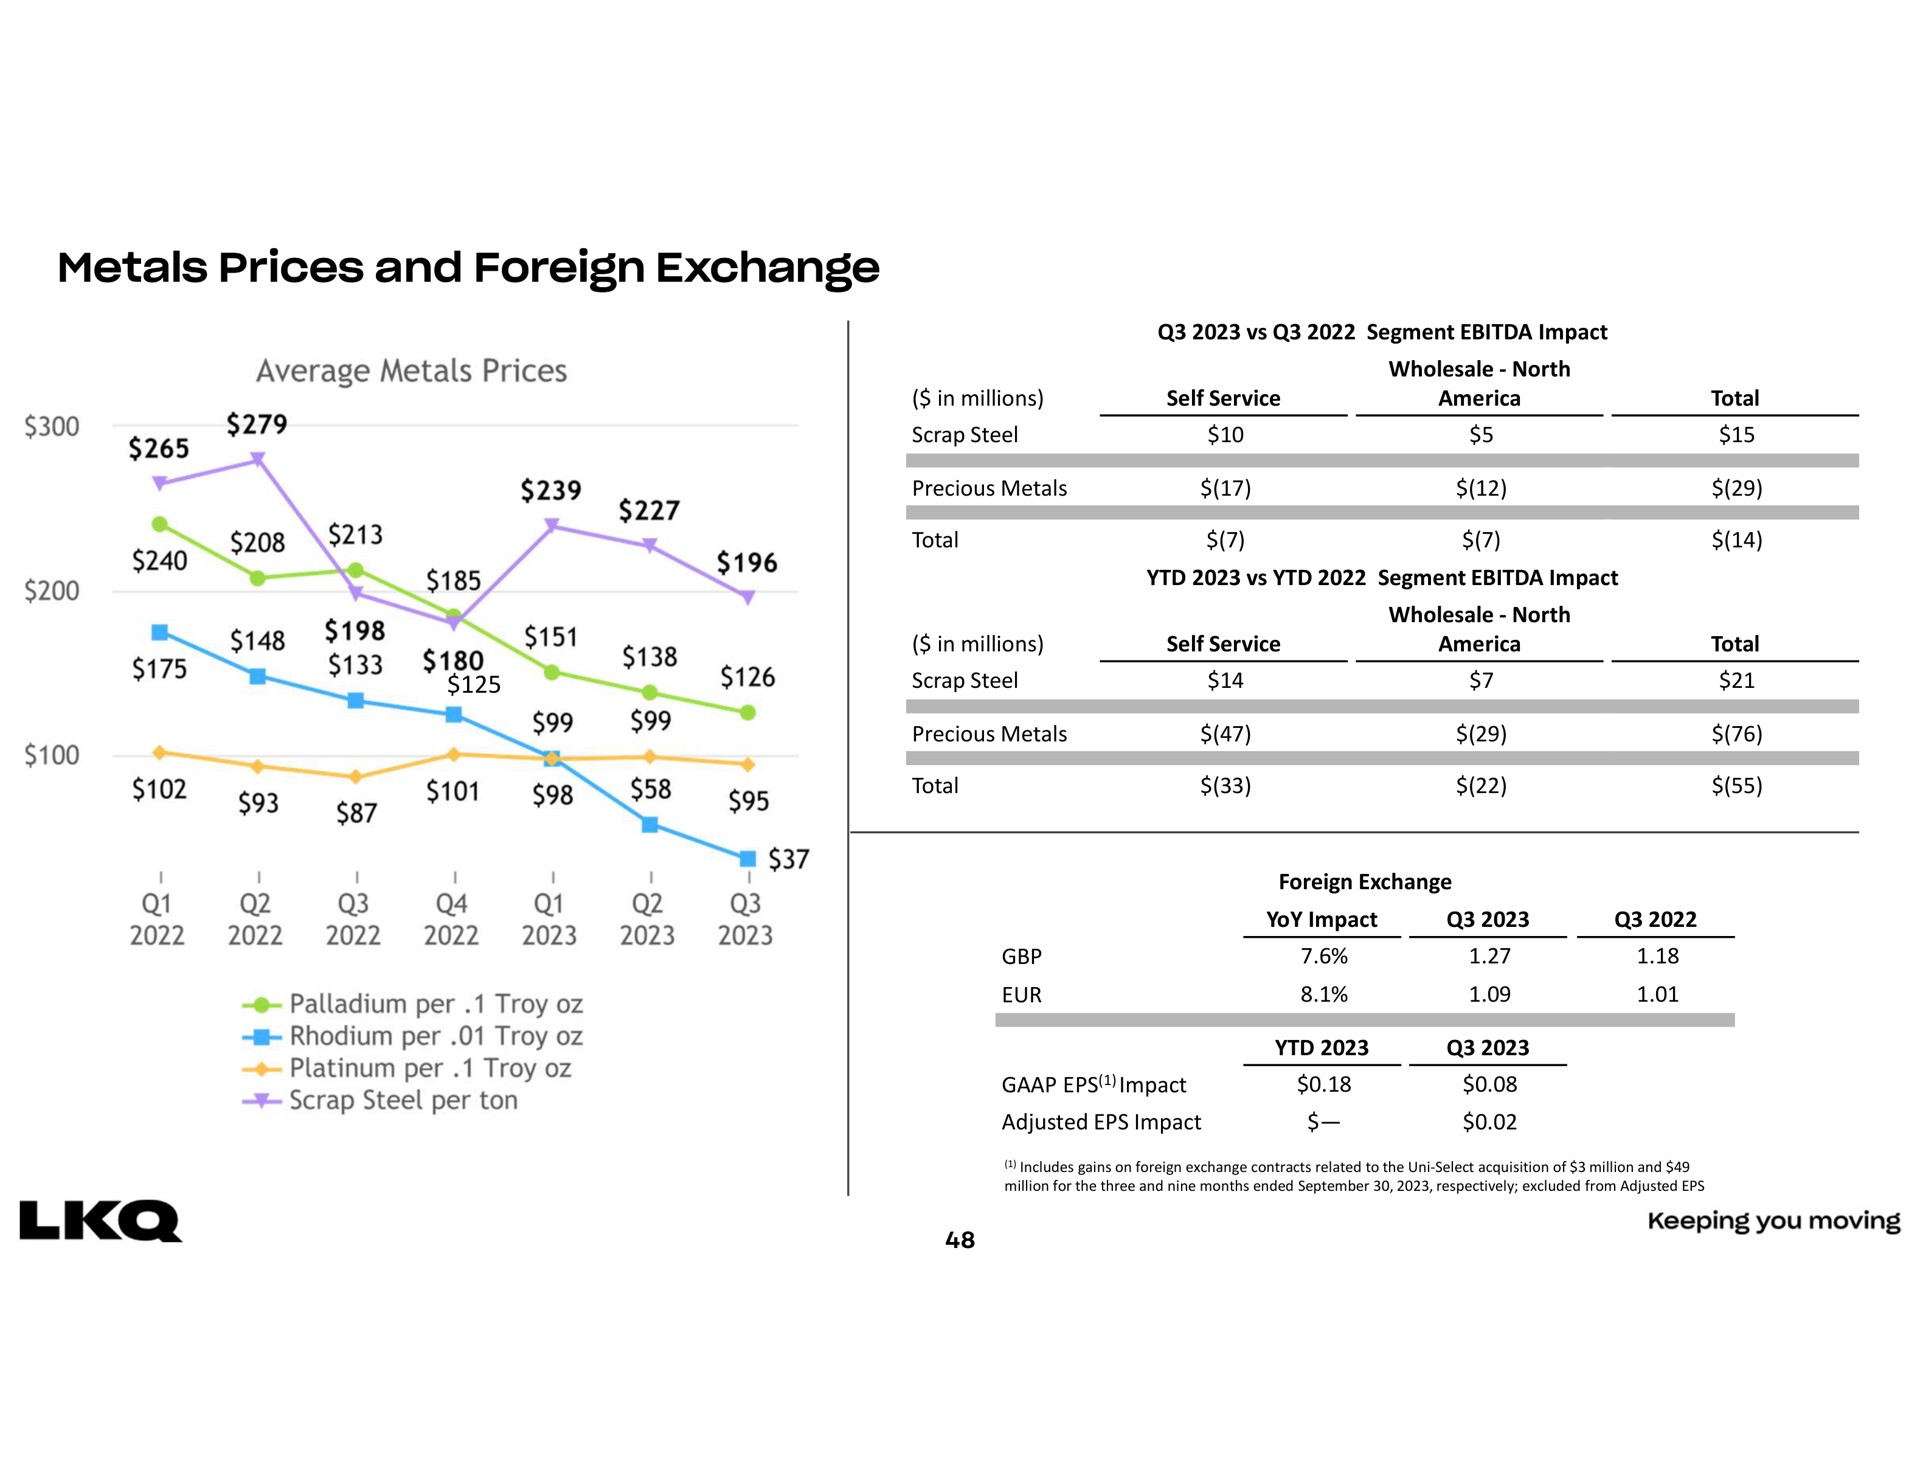 metals prices and foreign exchange guar i cay | LKQ